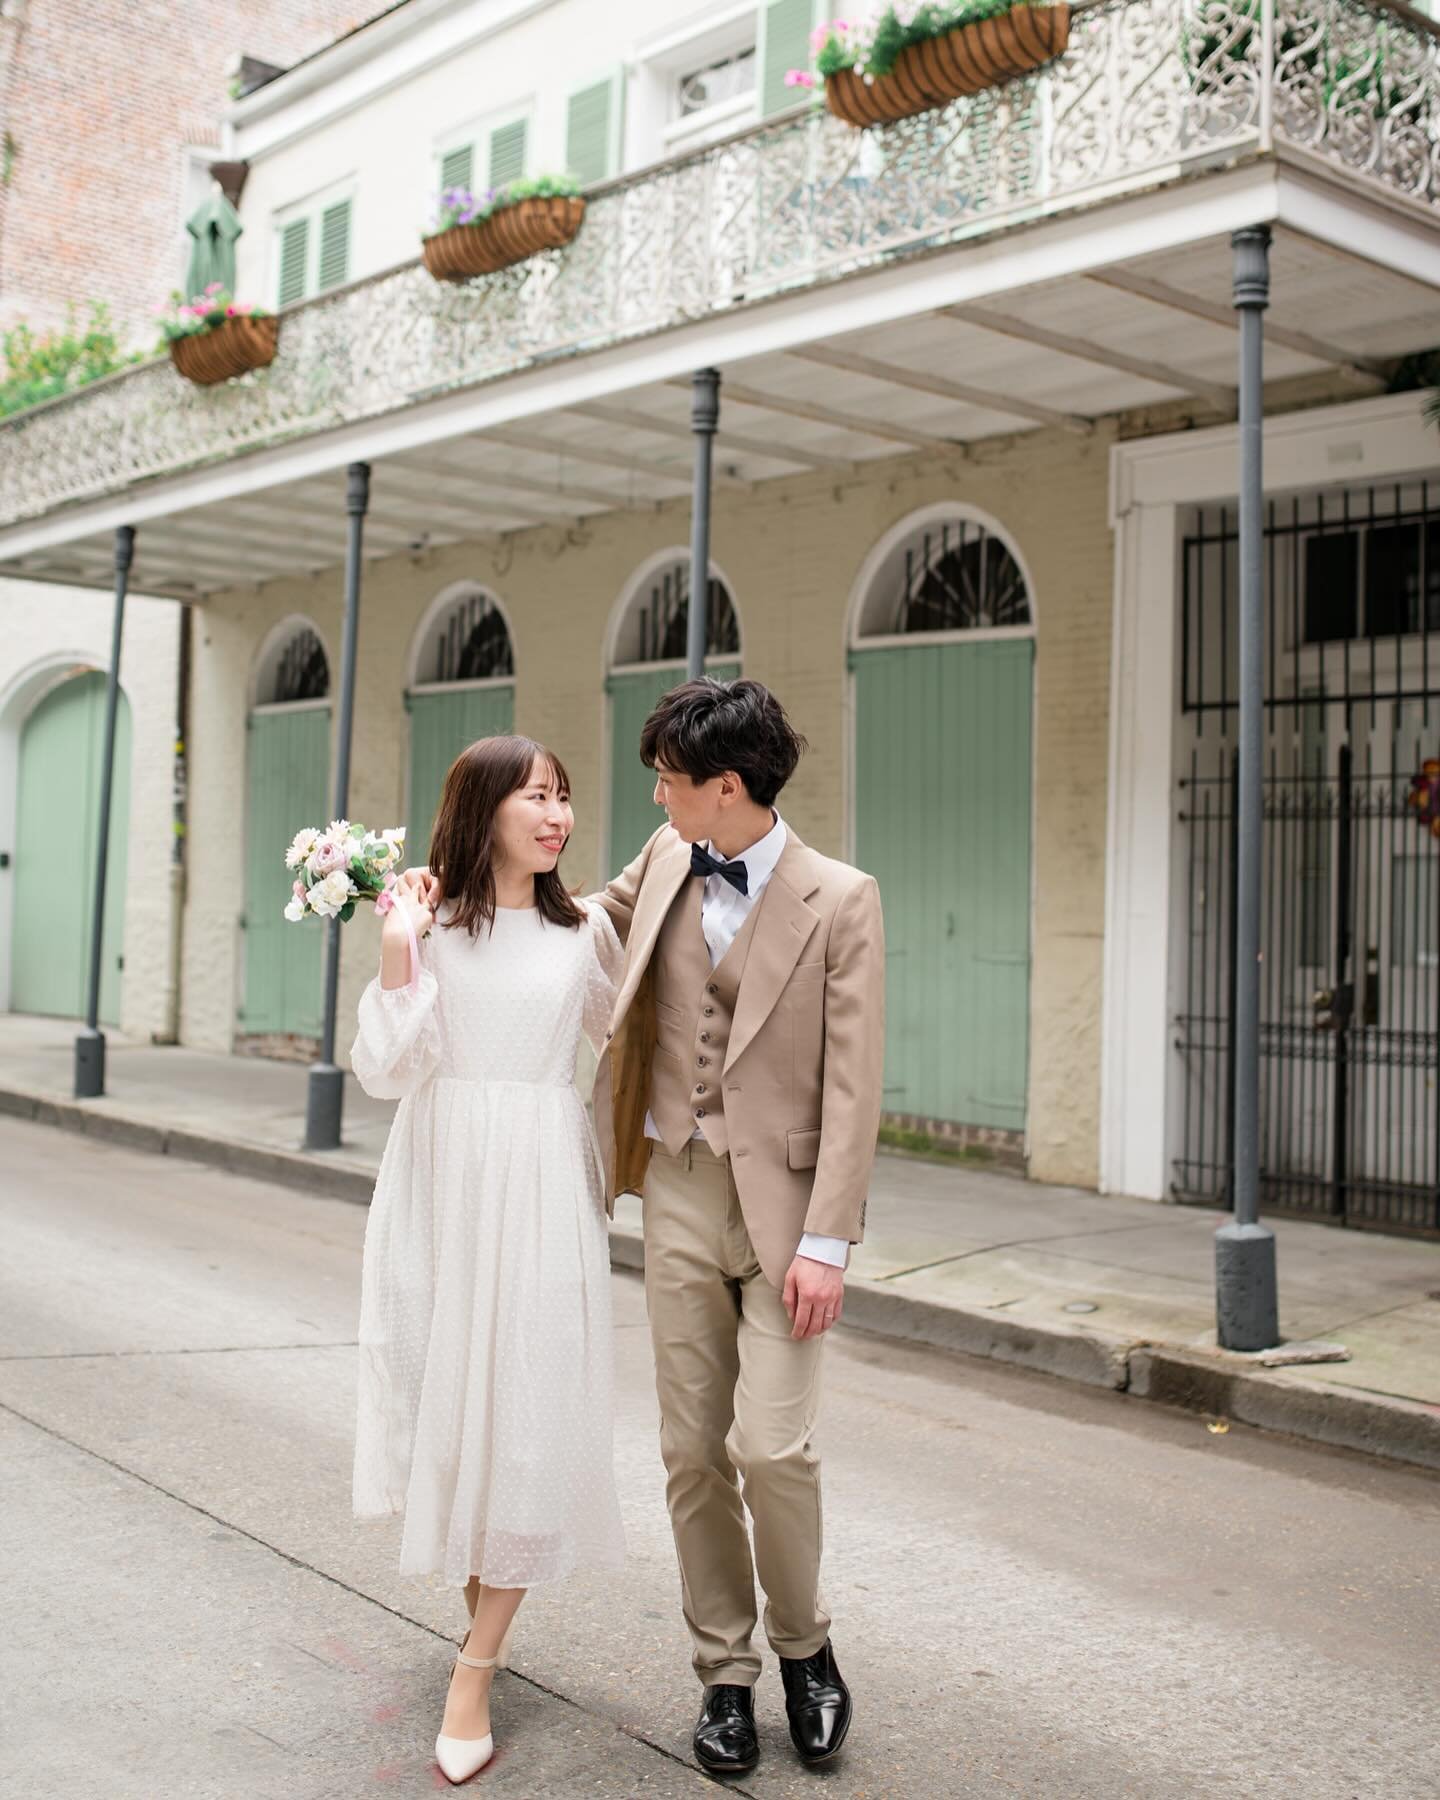 Sunday mornings in the Quarter is my new happy place. Tip: If you want better access to many popular landmarks, go early! Asuko and Daoi are on a tour across America and they had to make New Orleans a stop. They were so sweet and gracious. Now I have